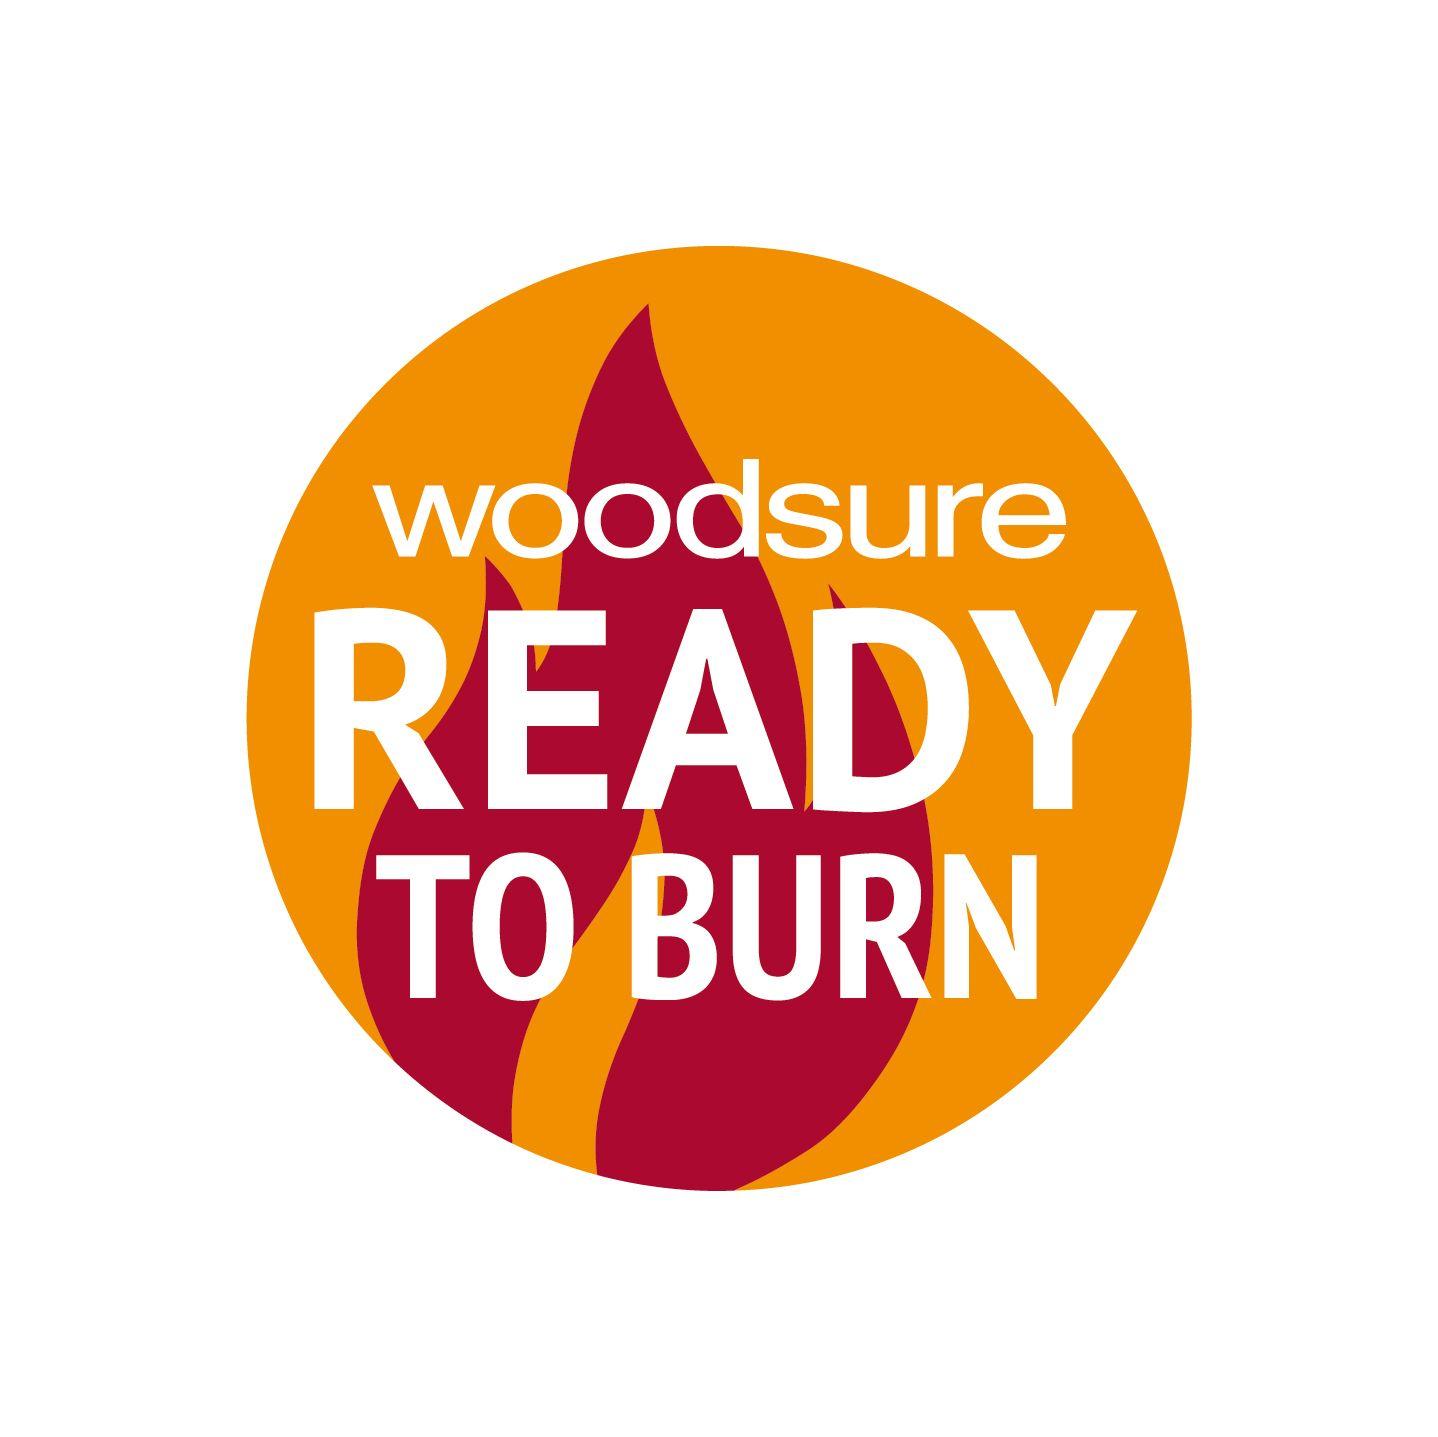 Burn Logo - Are you using Ready to Burn Firewood | New Scheme from Woodsure |